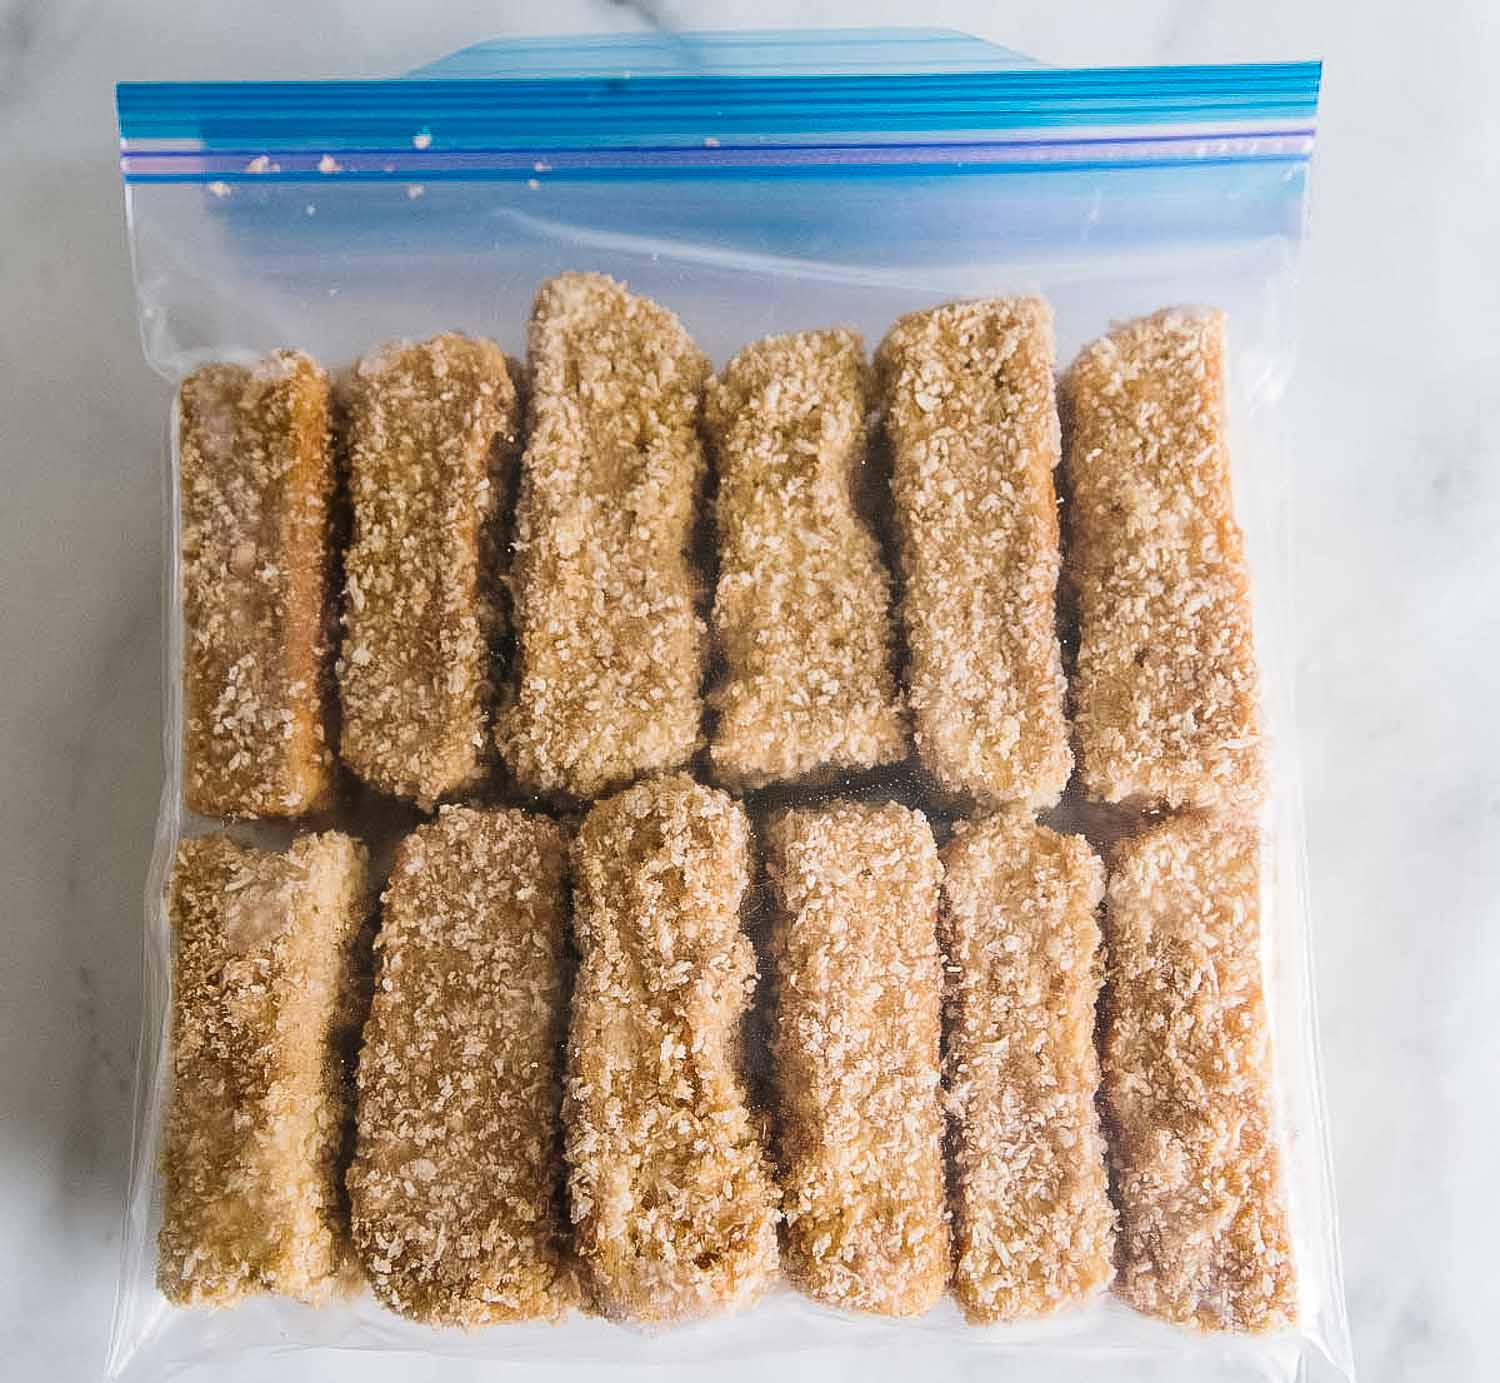 A gallon size ziploc bag with French toast sticks in it.